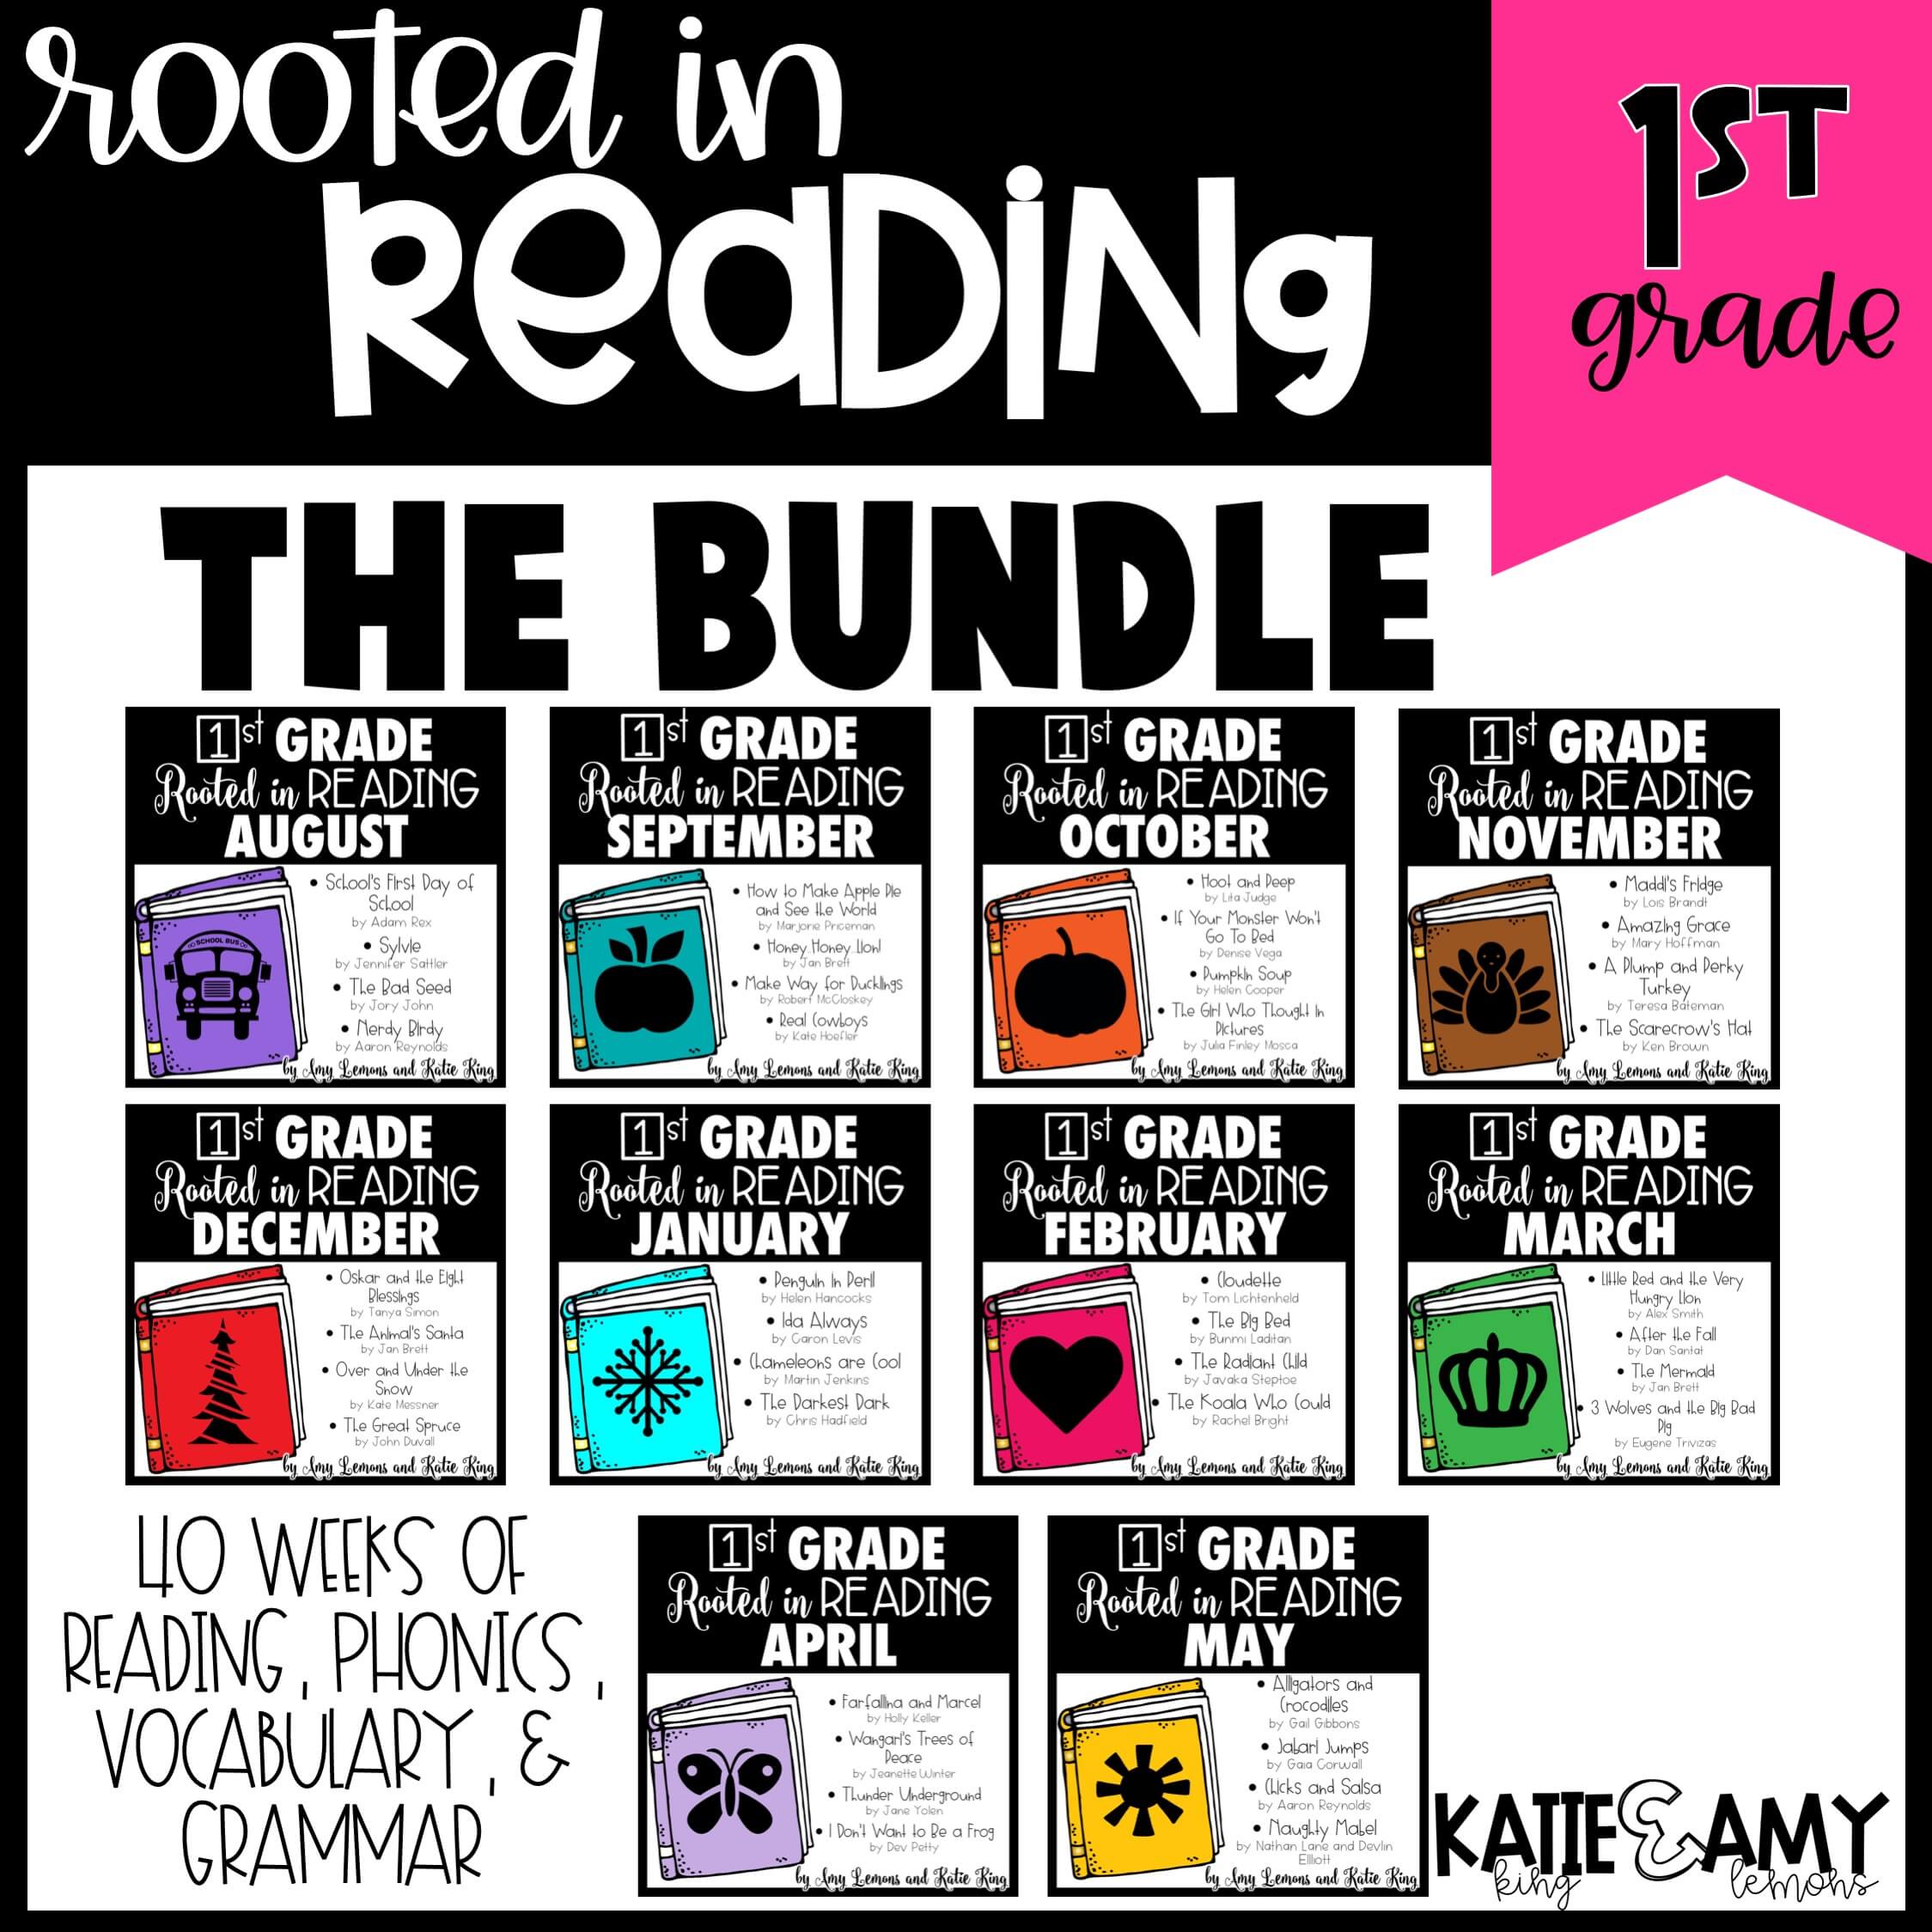 1st Grade Rooted in Reading BUNDLE